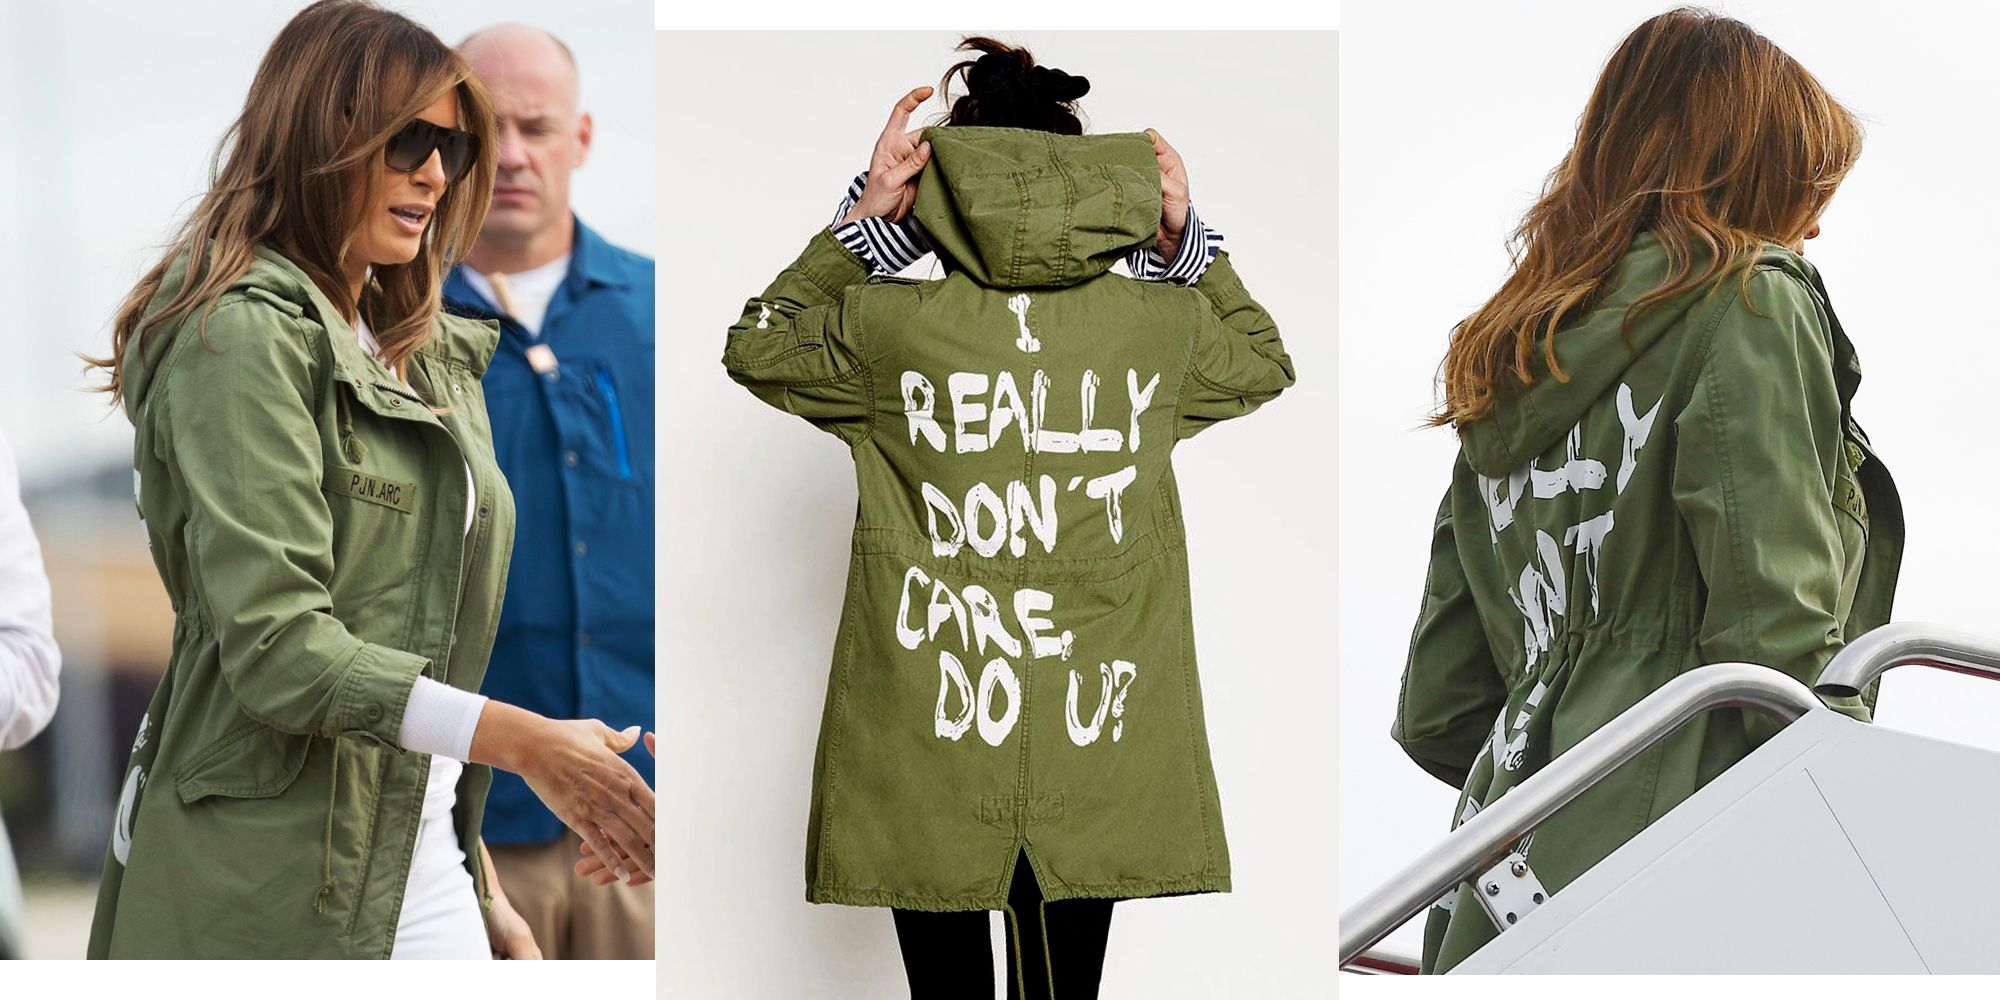 Melania Trump Admitted That She Wore Her I Really Don T Care Jacket To Send A Message